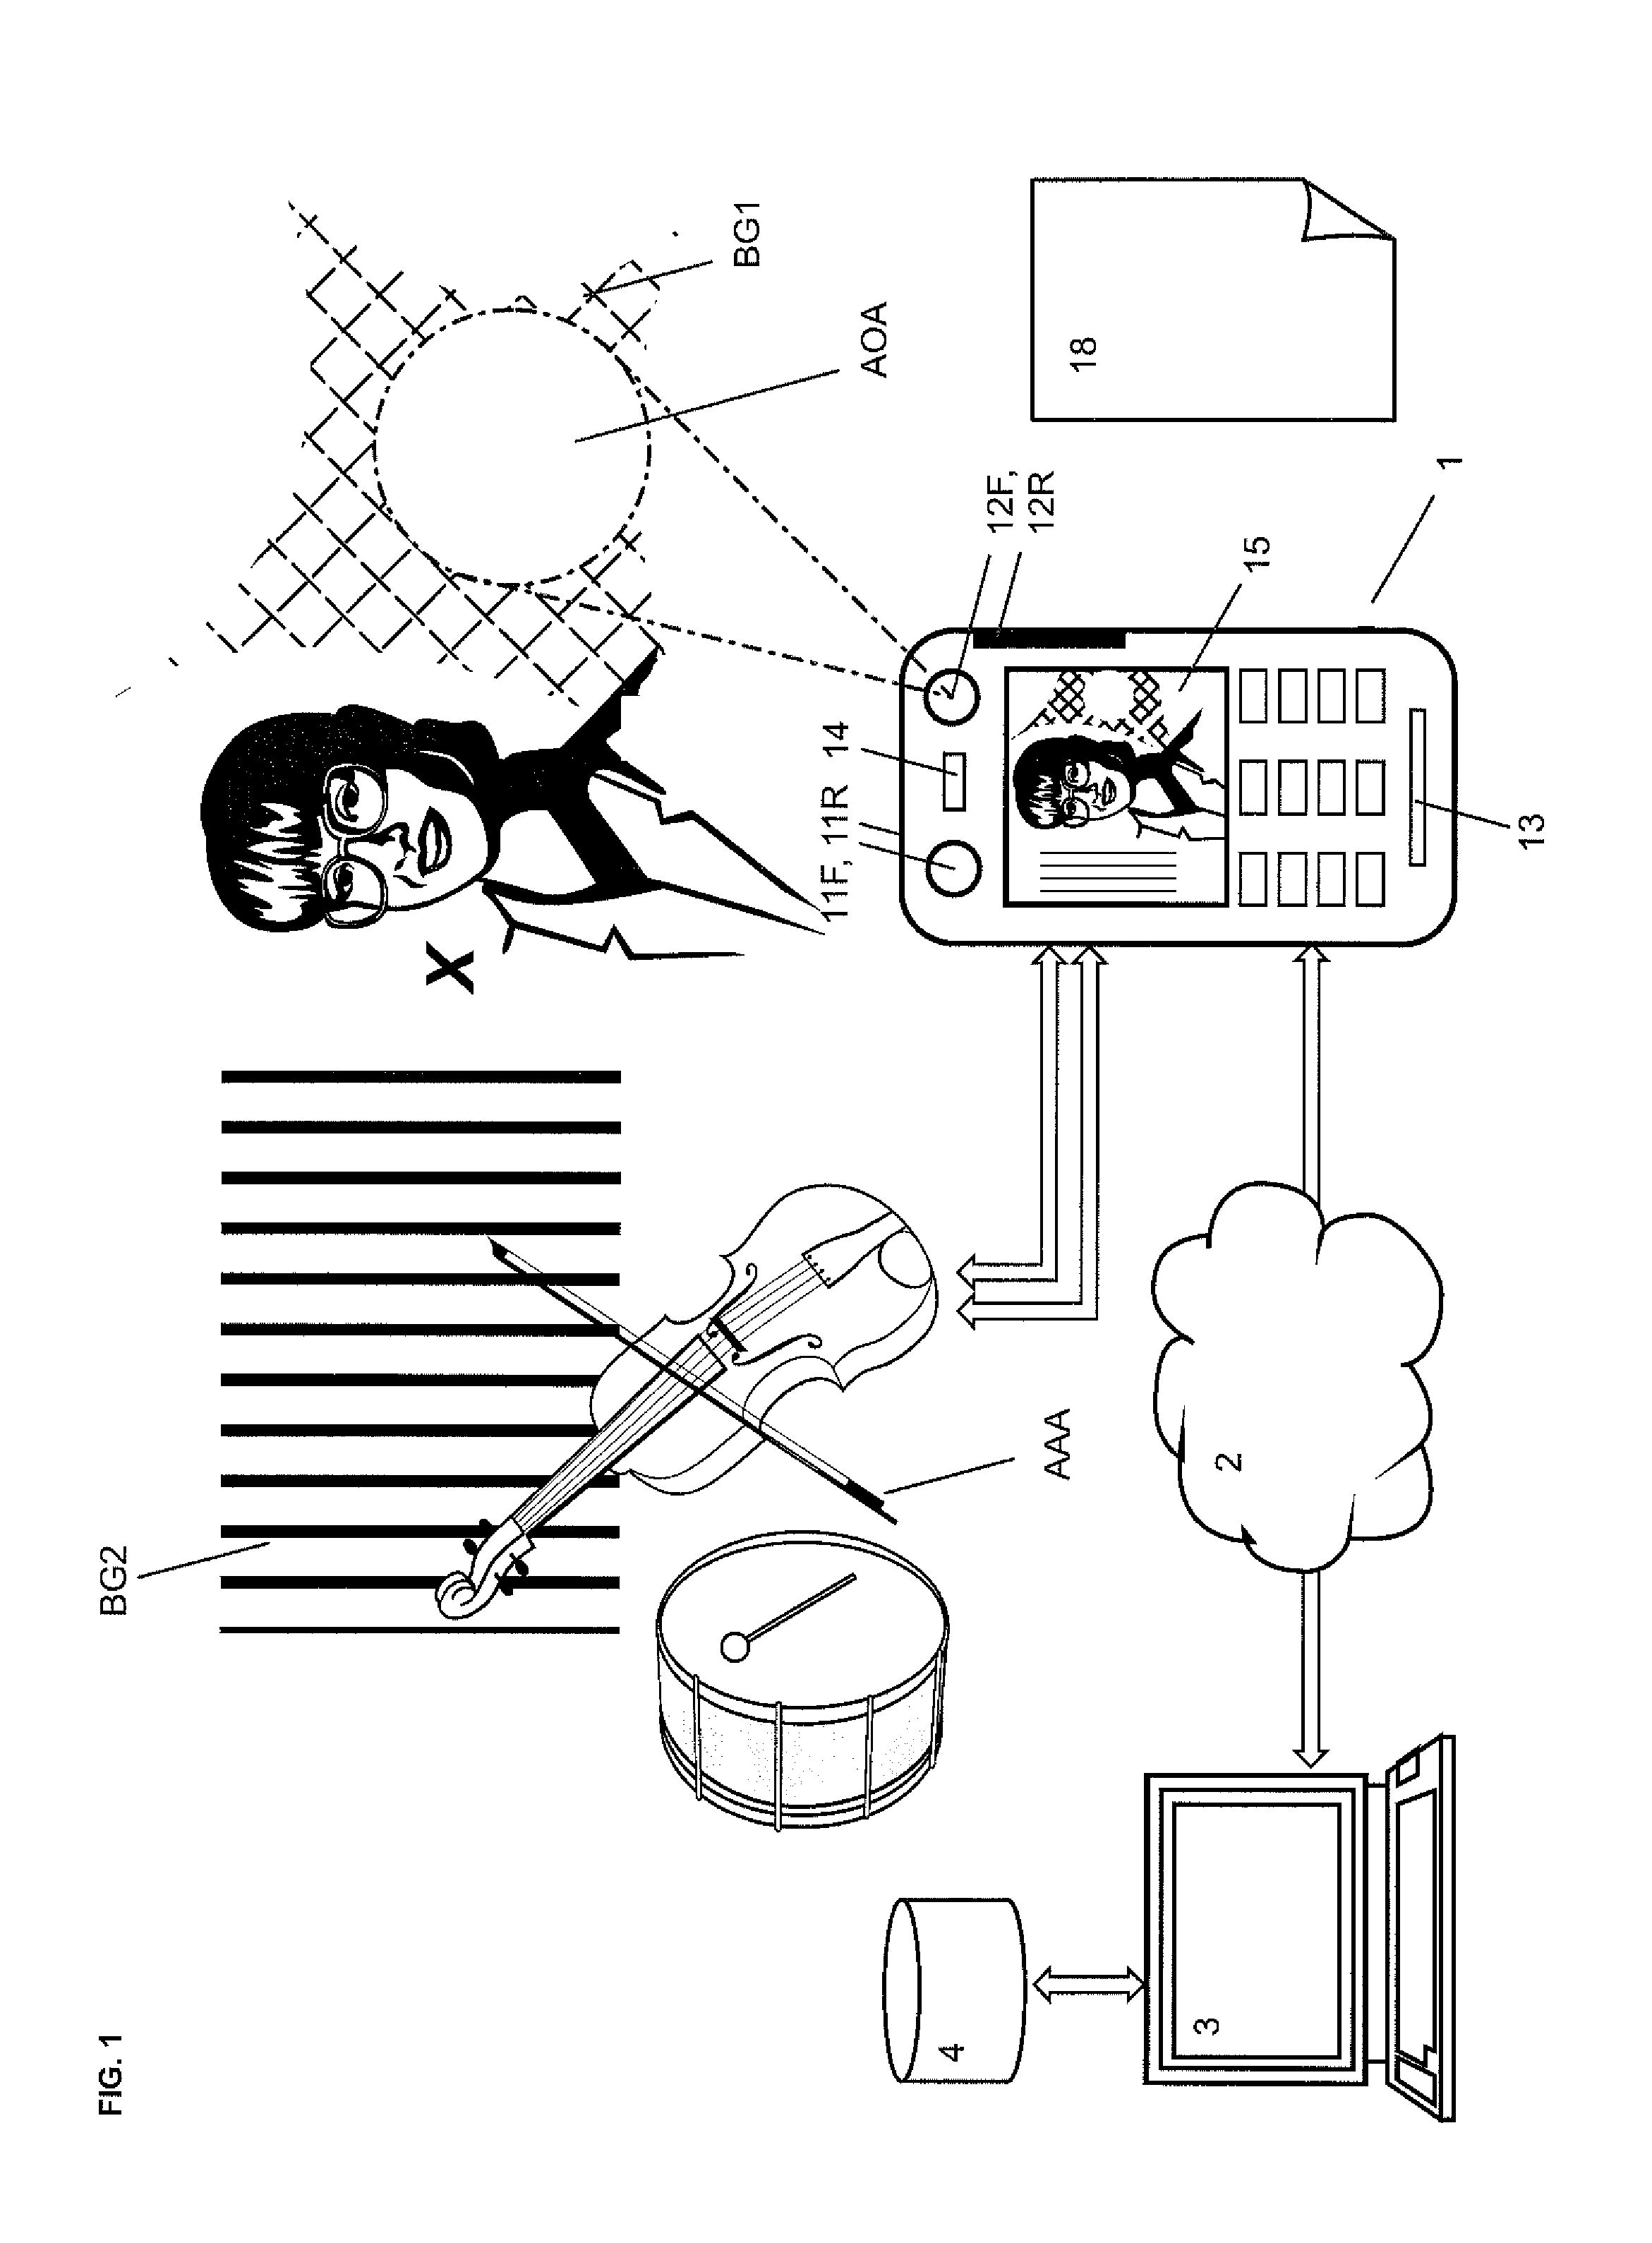 Method and system for enforced biometric authentication